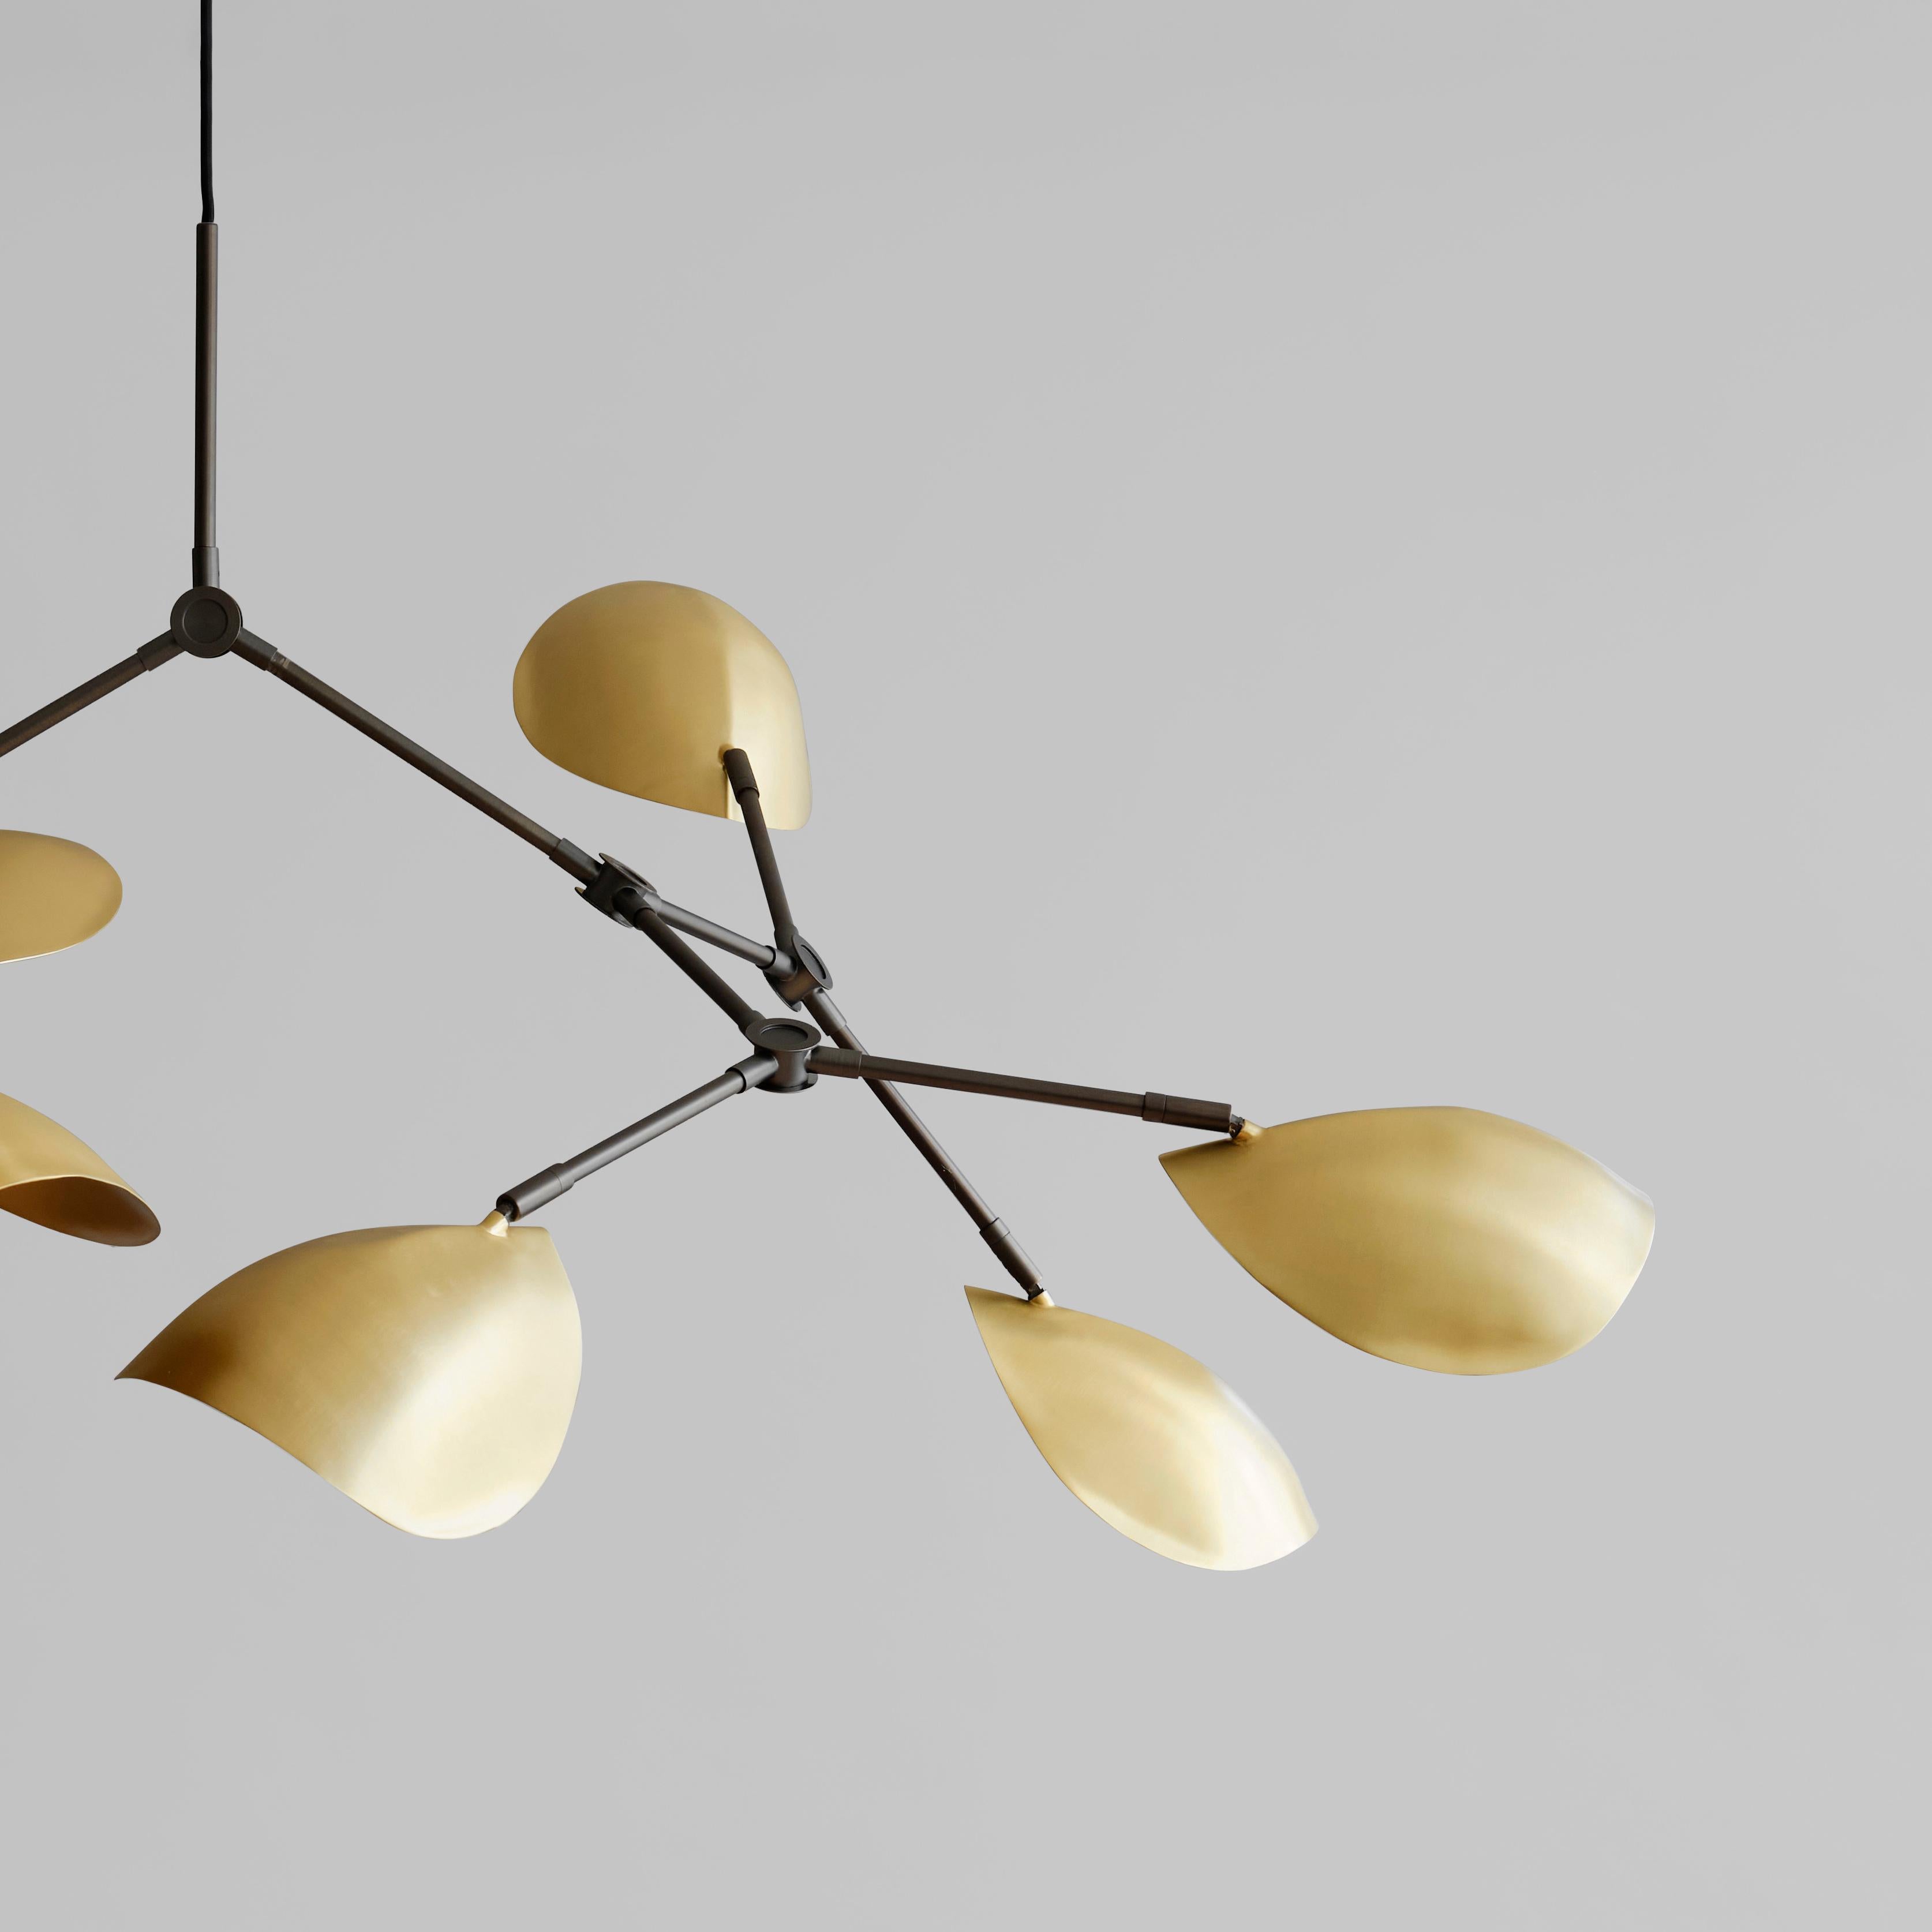 Stingray chandelier brass by 101 Copenhagen
Designed by Kristian Sofus Hansen & Tommy Hyldahl.
Dimensions: L 200 x W 155 x H 88 cm
Materials: brass
Lampshade & Ceiling cup: 100% Iron, with plated Brass finish
Pipes & attachment parts are made